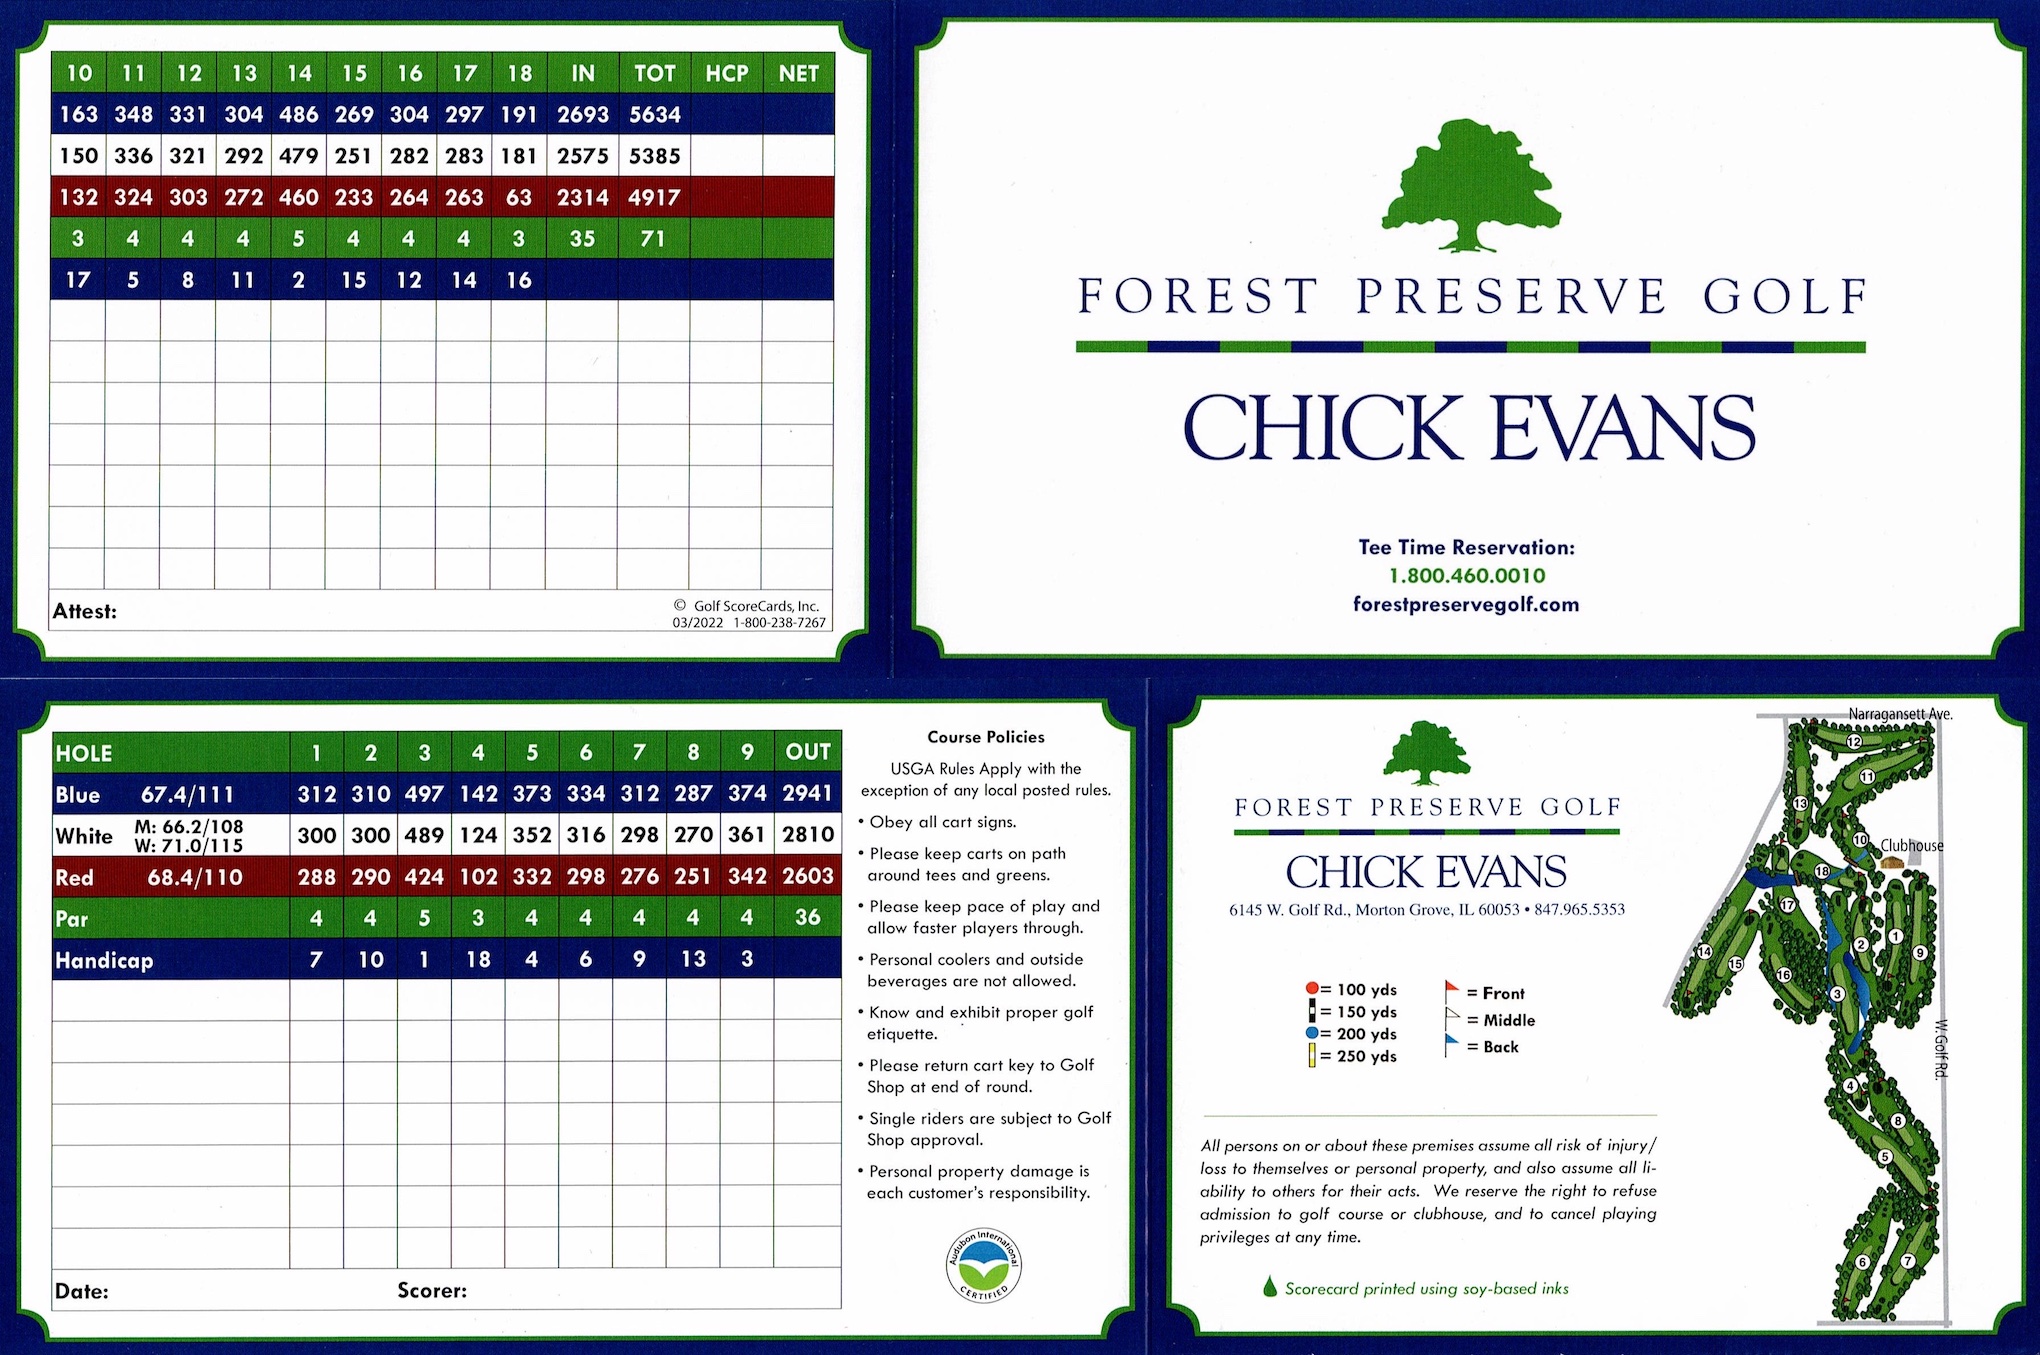 Scan of the scorecard from Chick Evans Golf Course in Morton Grove, Illinois. Scans of the front and back of the scorecard at Chick Evans.